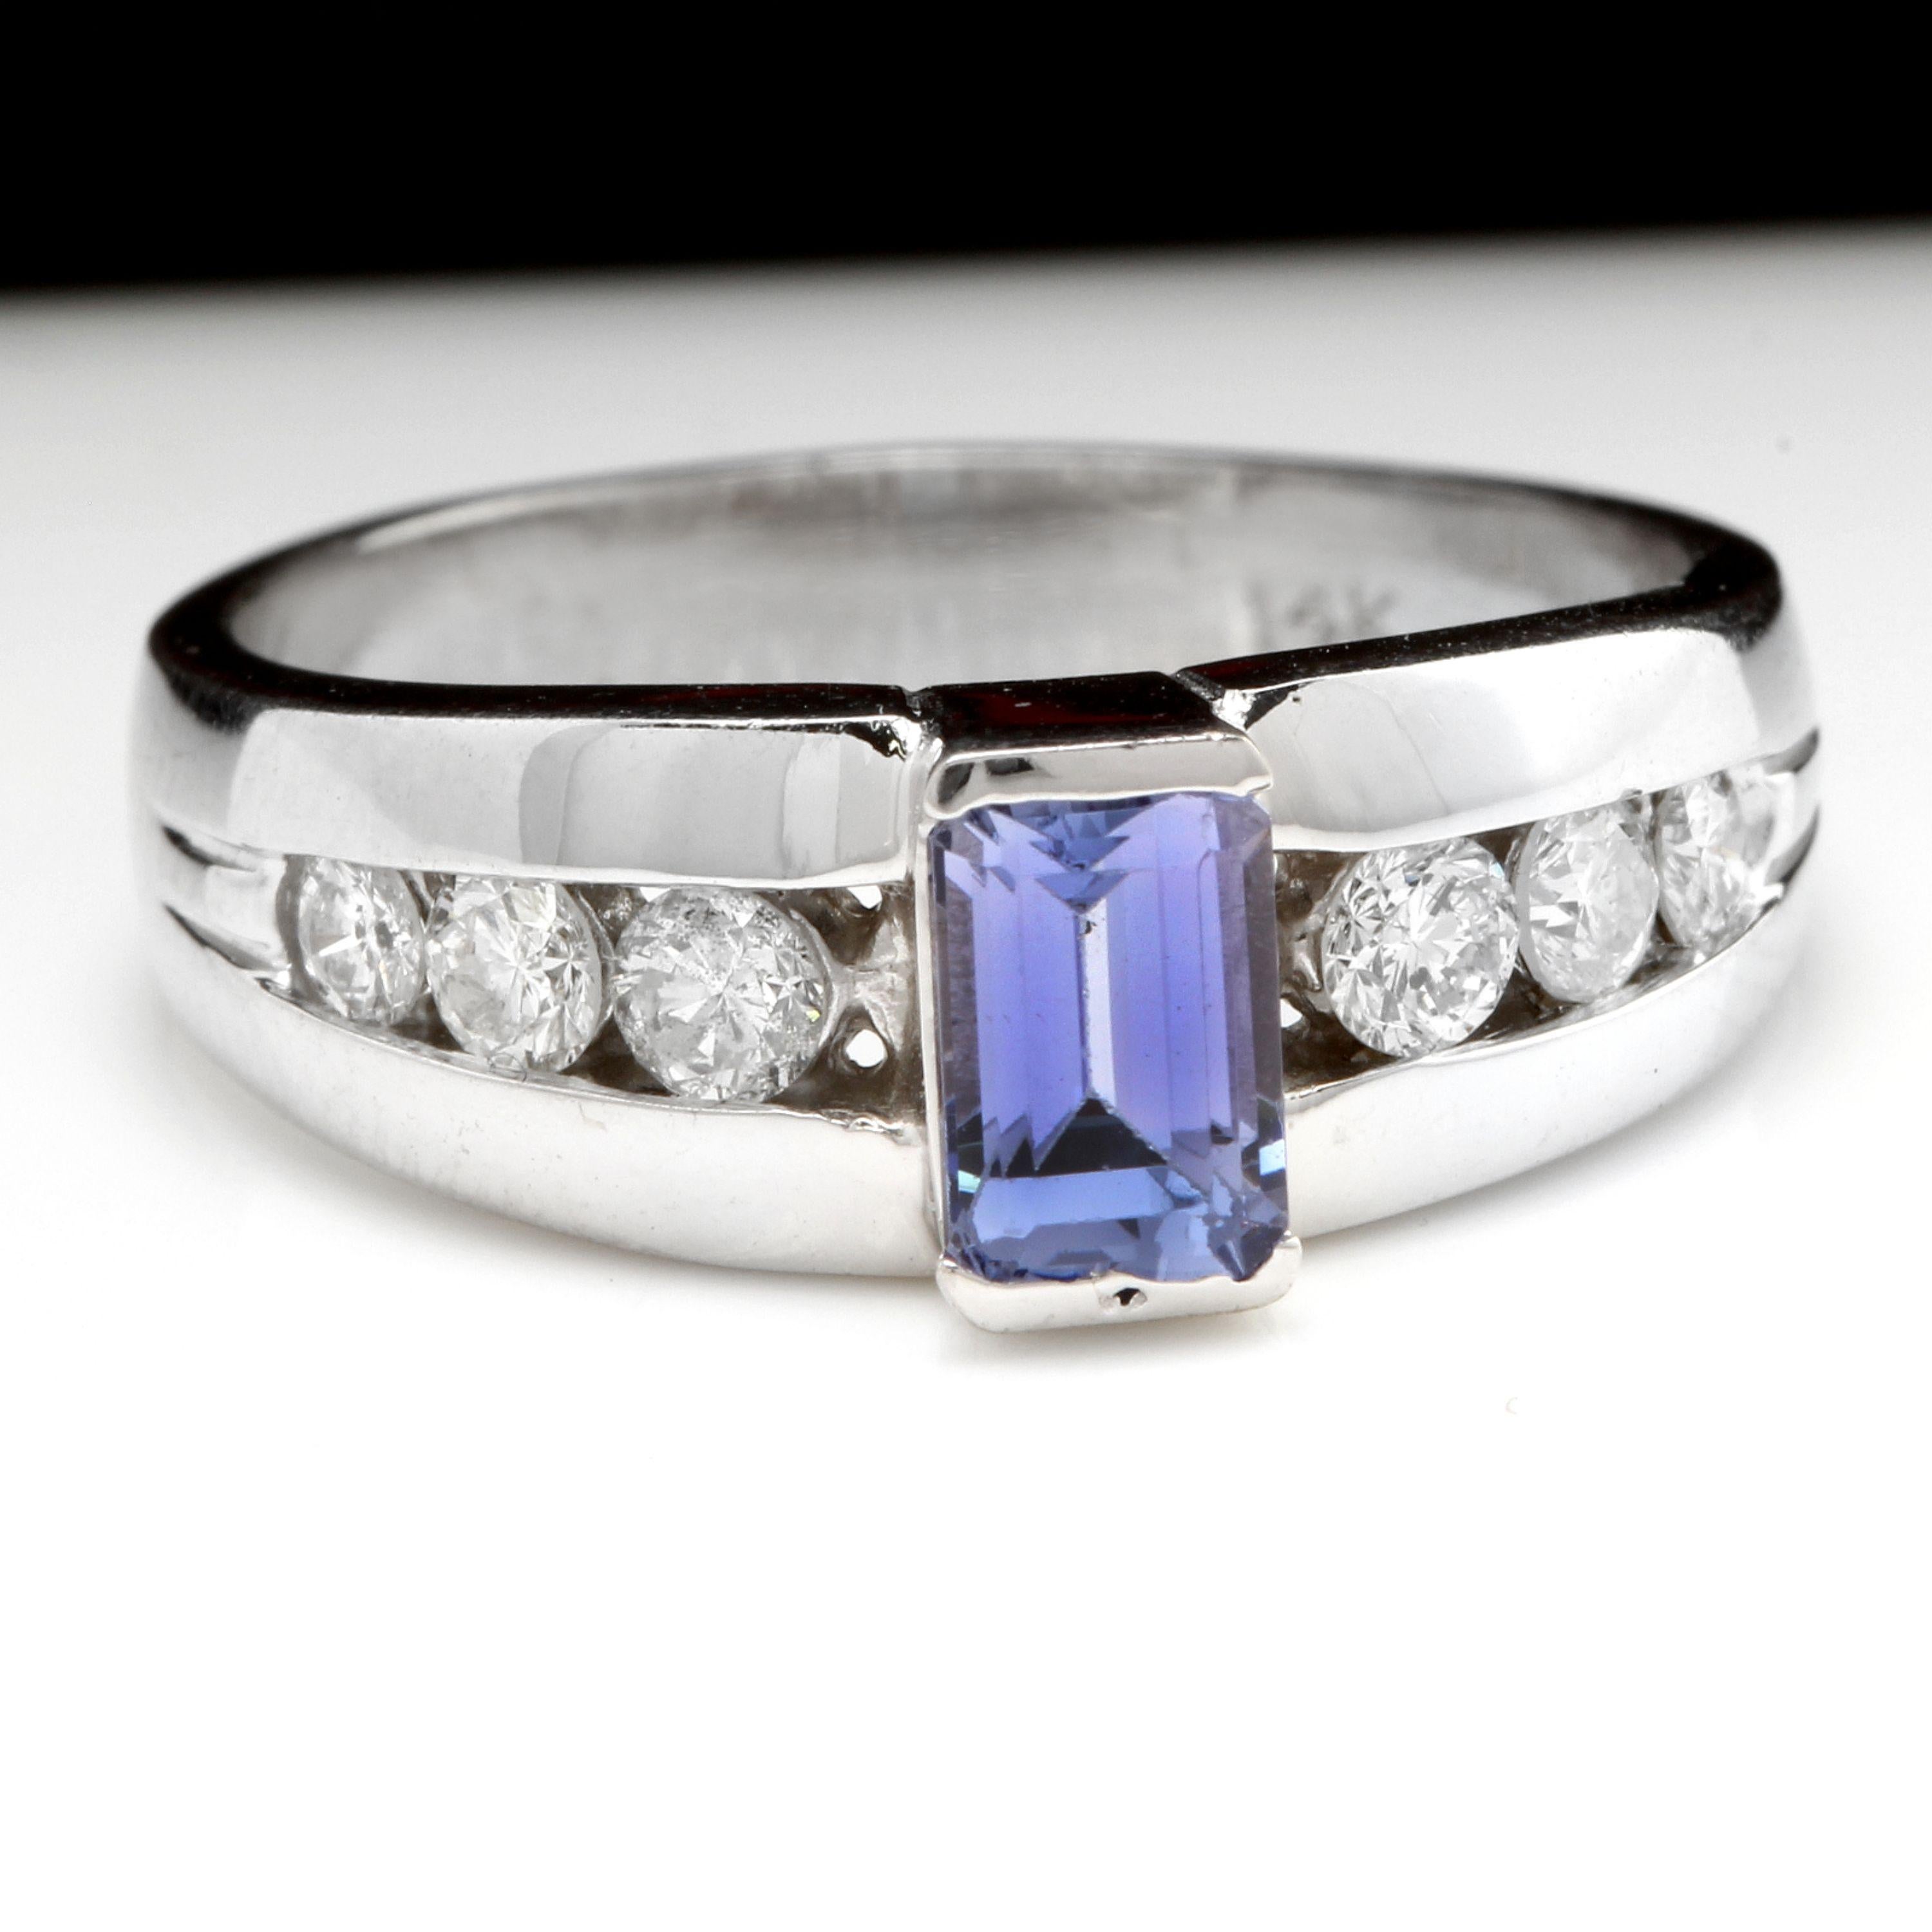 1.00 Carat Natural Very Nice Looking Tanzanite and Diamond 14K Solid White Gold Ring

Total Natural Emerald Cut Tanzanite Weight is: Approx. 0.68 Carats

Tanzanite Measures: 6 x 4mm

Tanzanite Treatment: Heat

Natural Round Diamonds Weight: Approx.